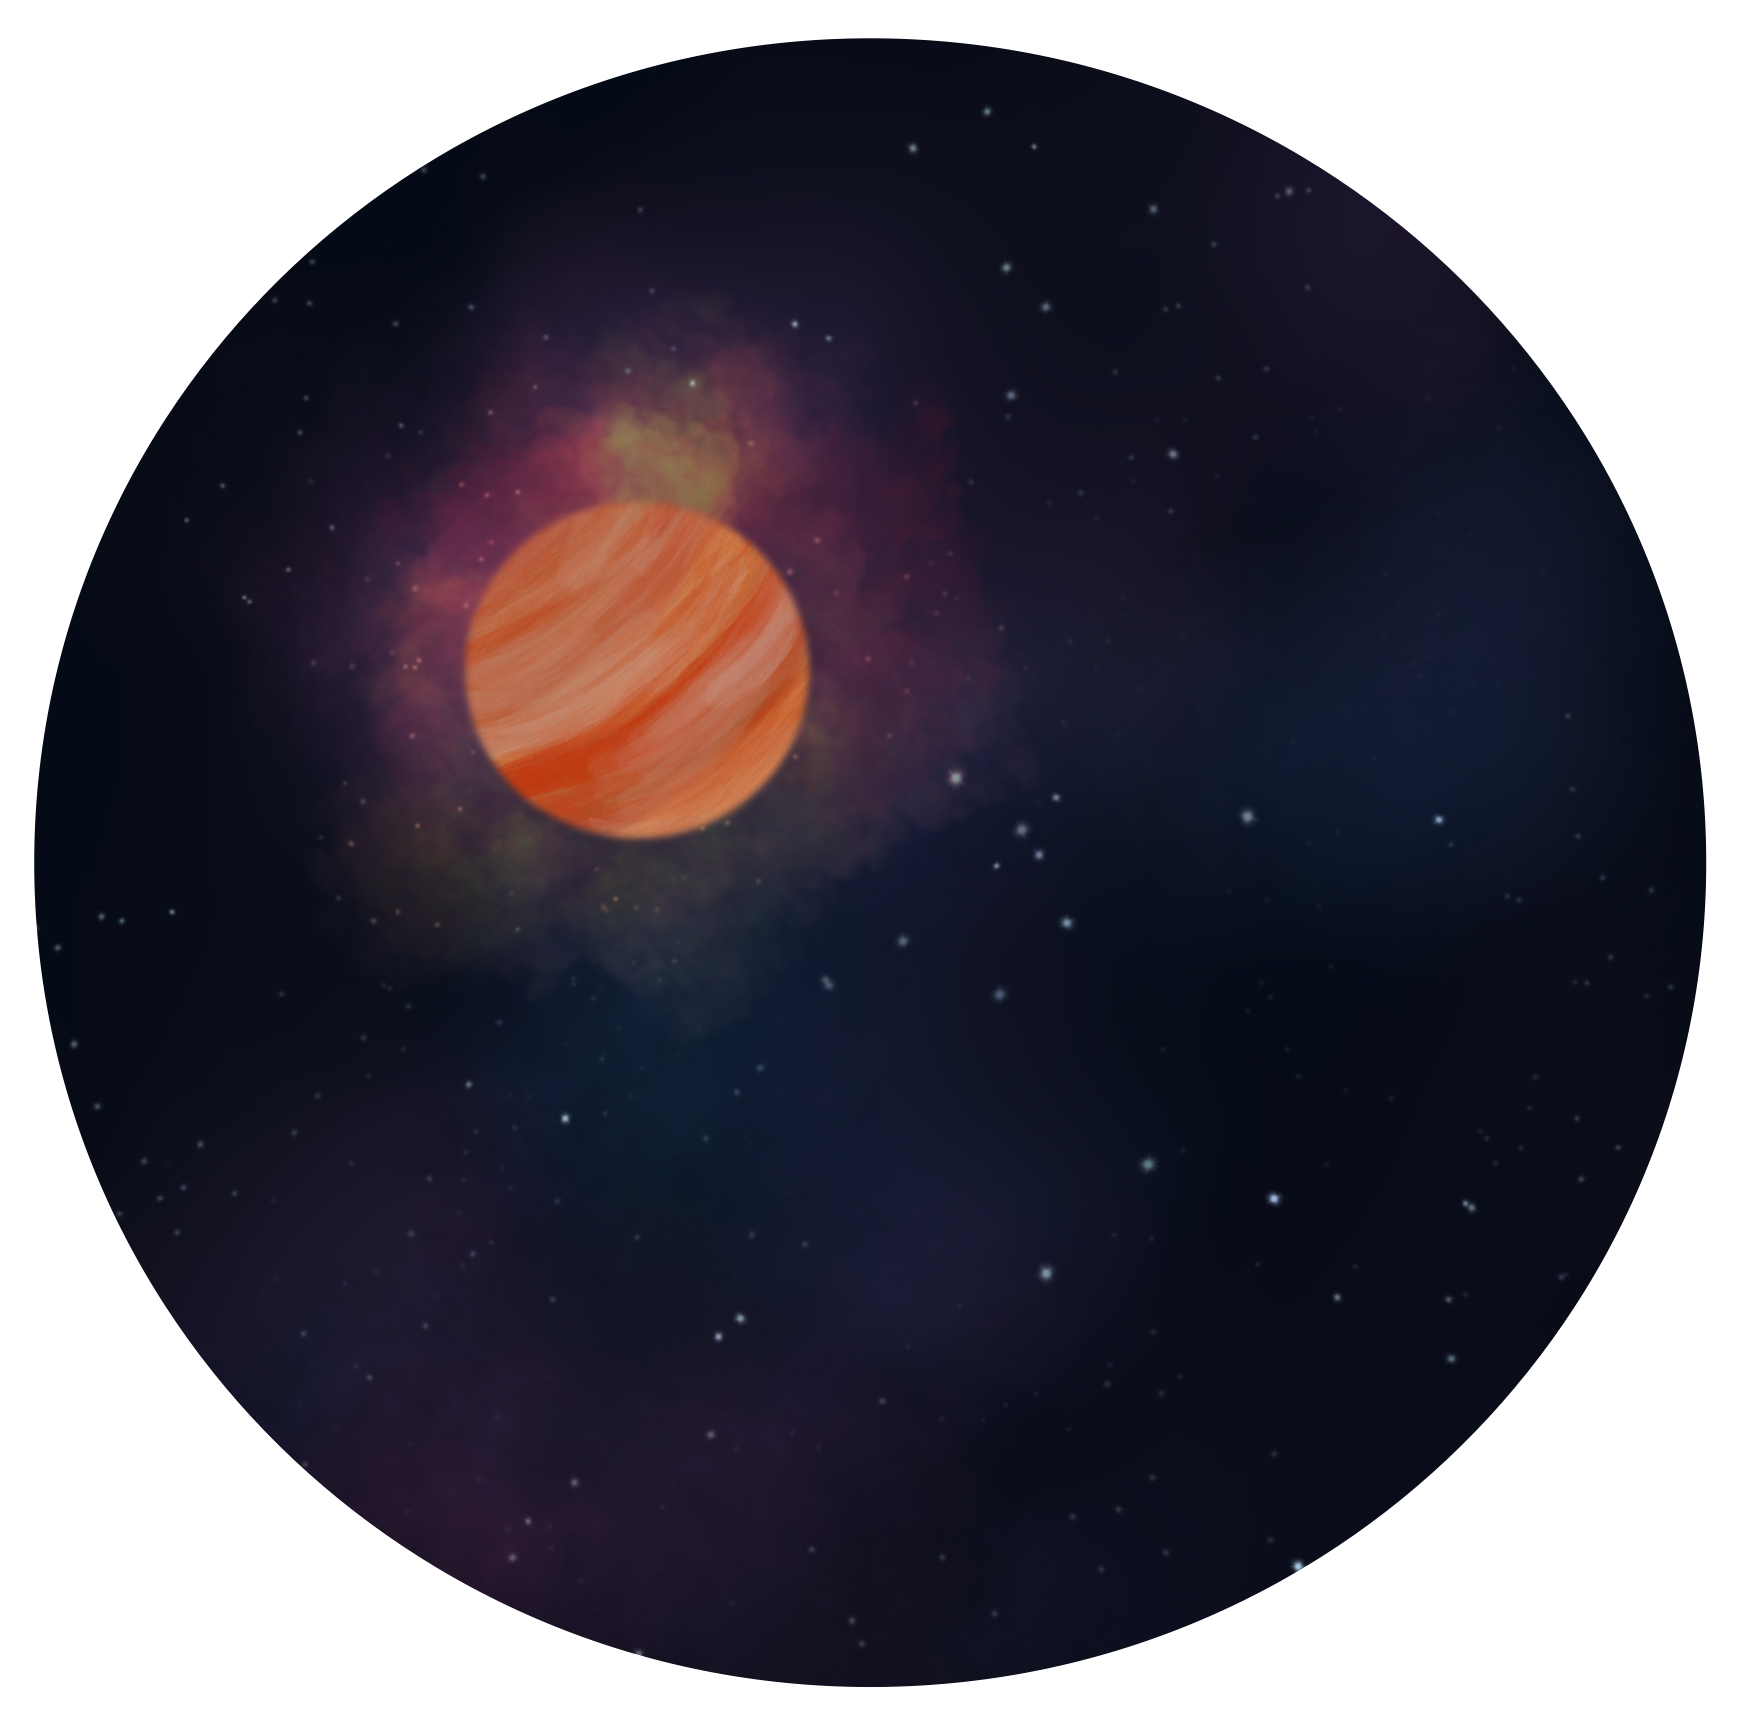 A red-and-orange swirled moon shape with a colorful aura, set against a galaxy background.